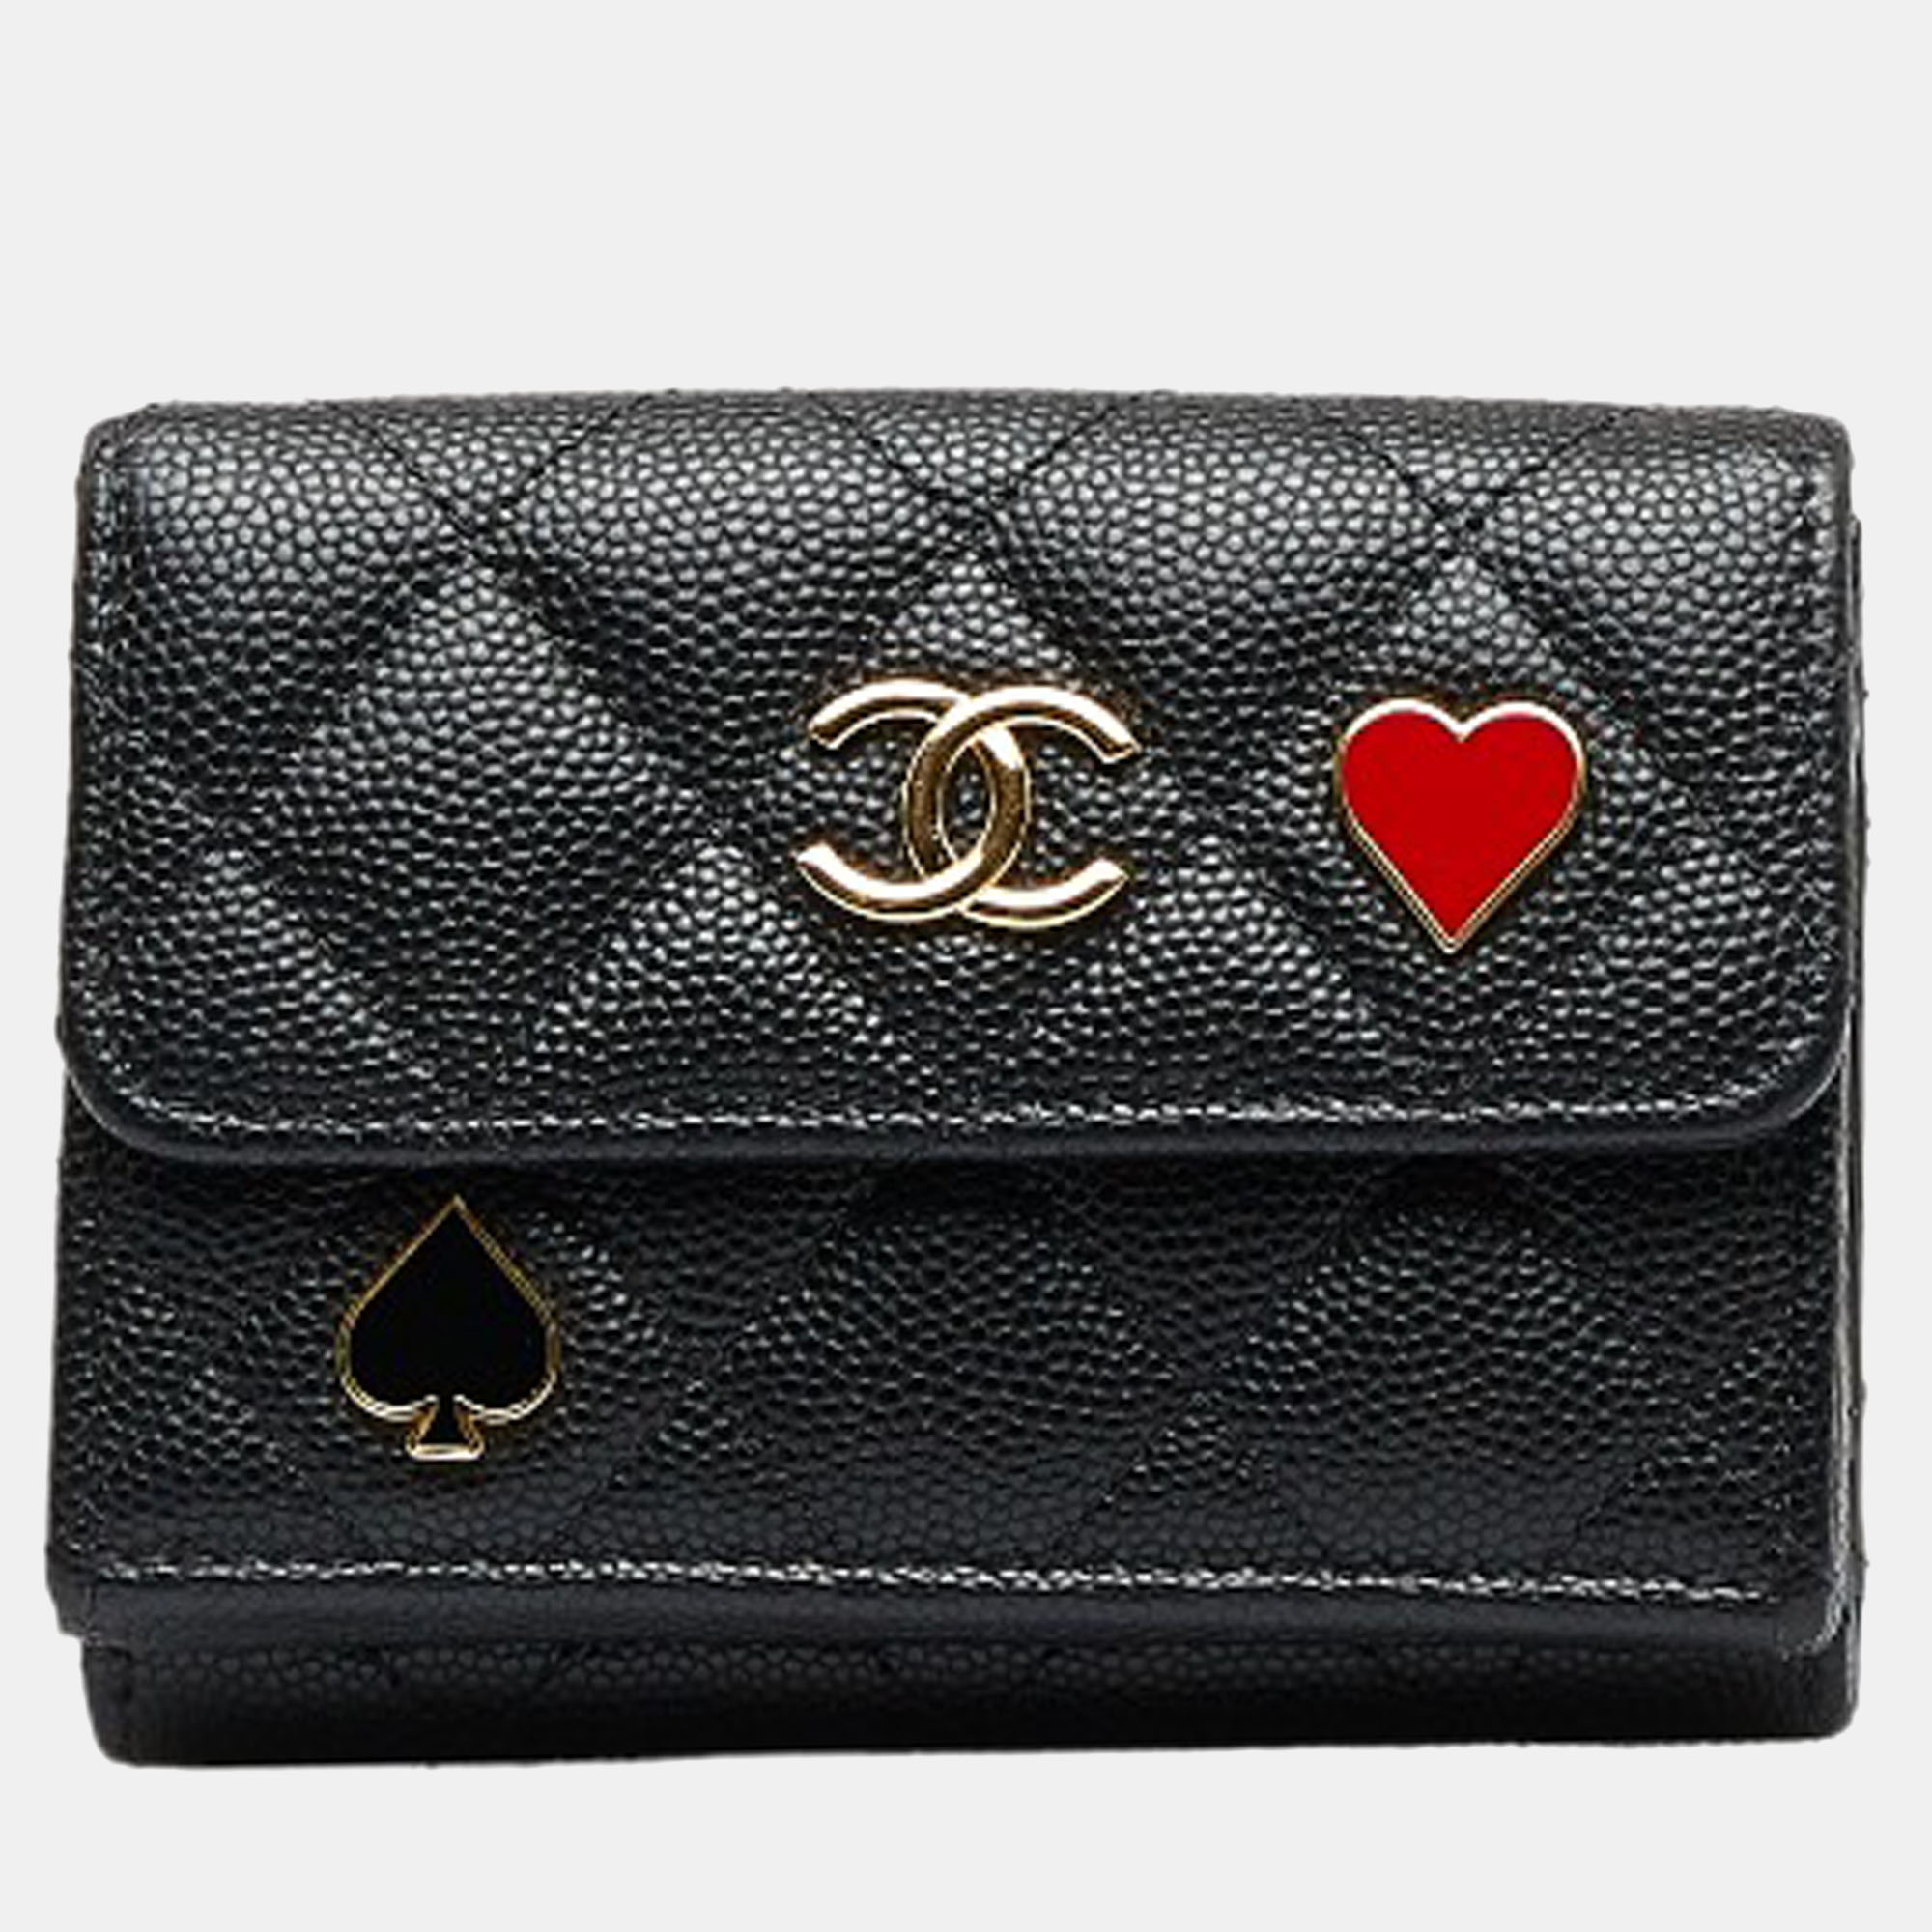 Pre-owned Chanel Black Caviar Leather Quilted Compact Heart Space Cc Wallet